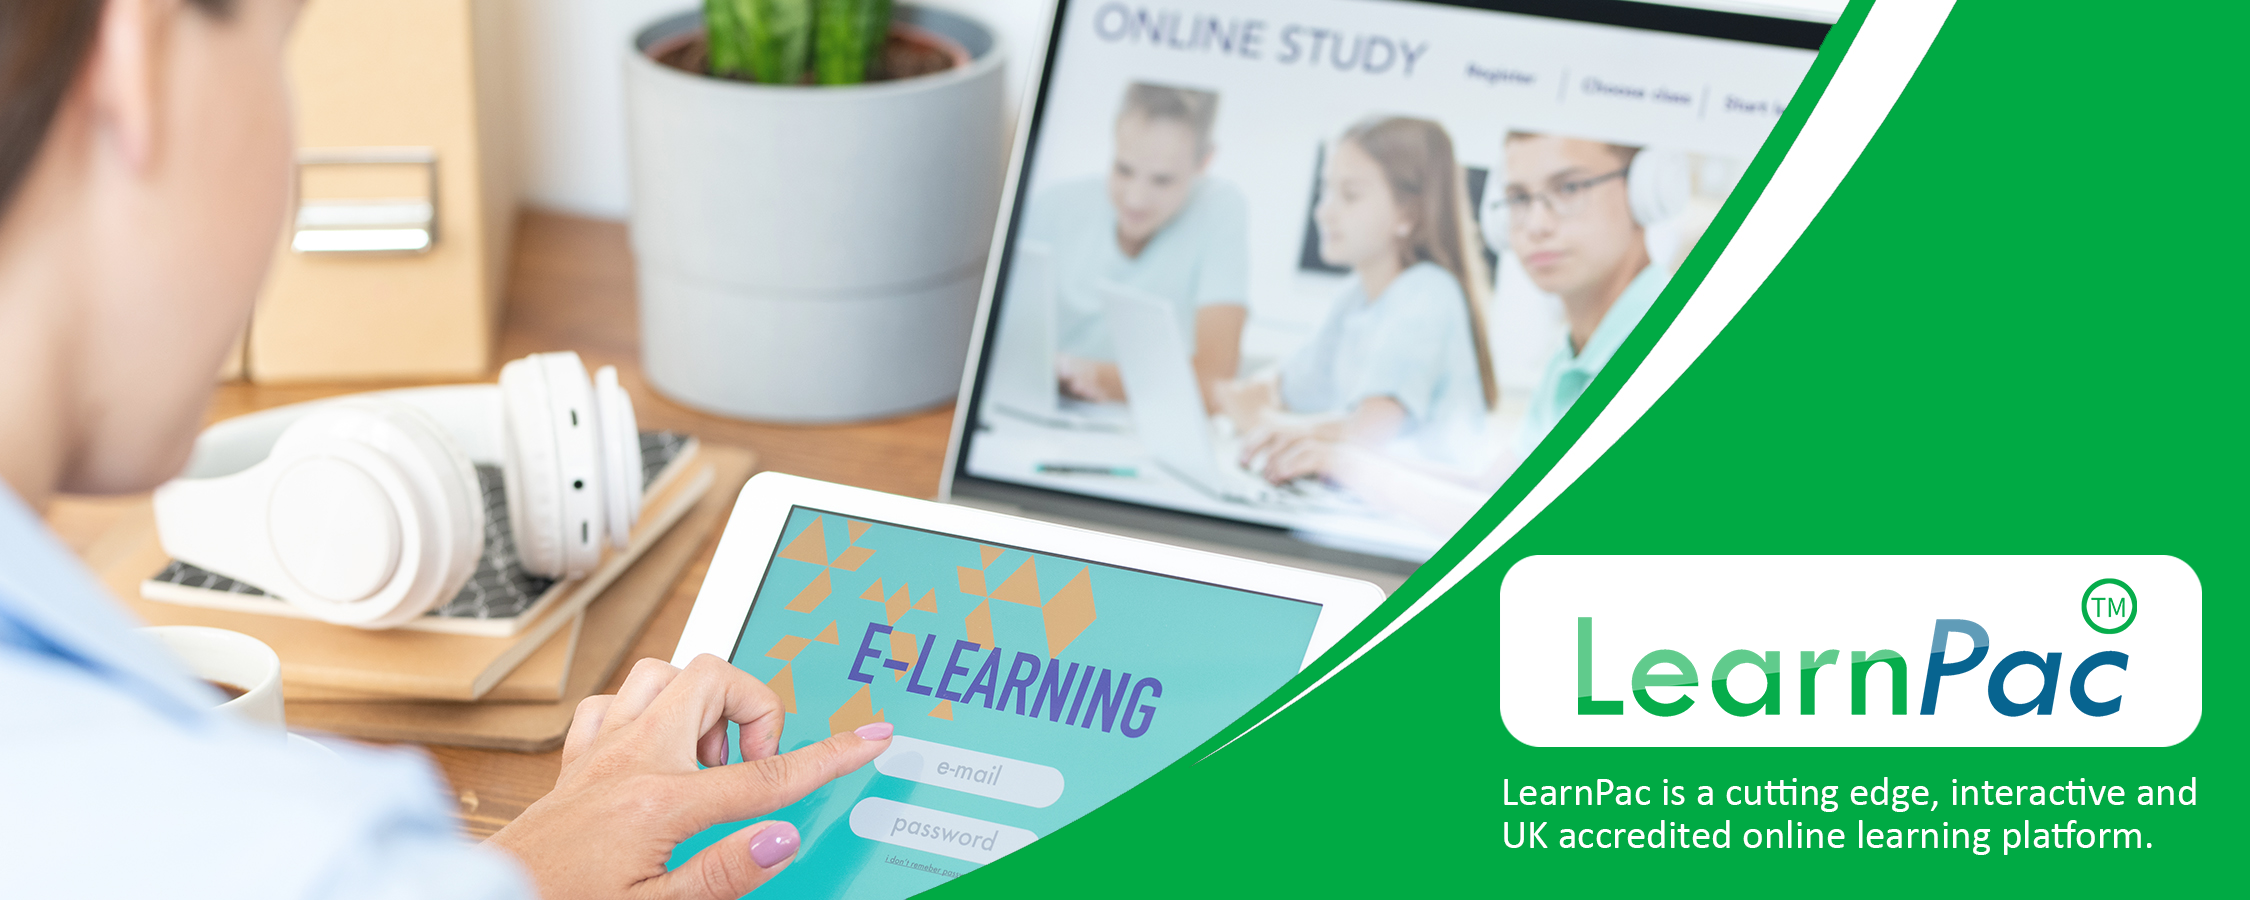 Health and Safety Dentistry - eLearning Course - CPD Certified - LearnPac Systems UK -